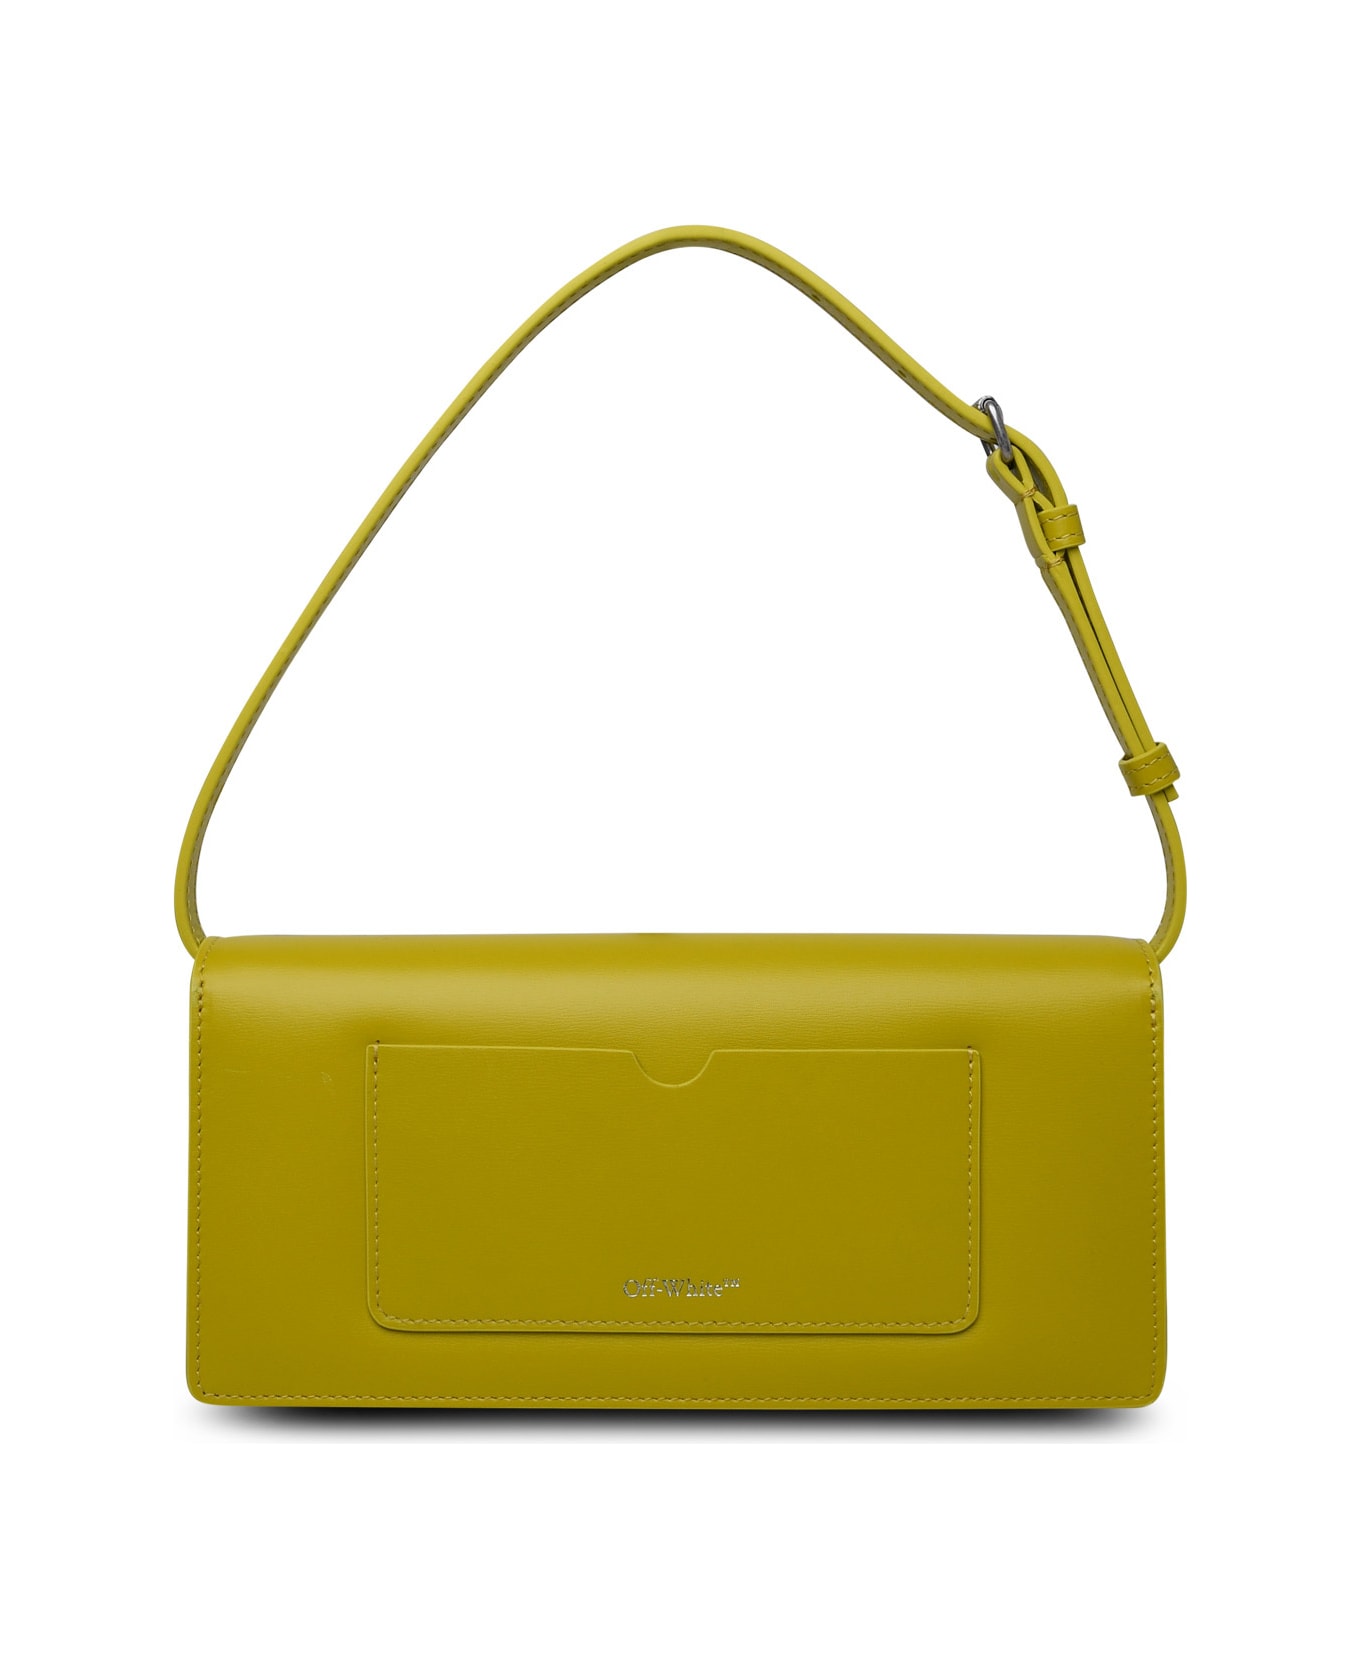 Off-White Jitney 1.0 Arrows Plaque Shoulder Bag - Green ショルダーバッグ